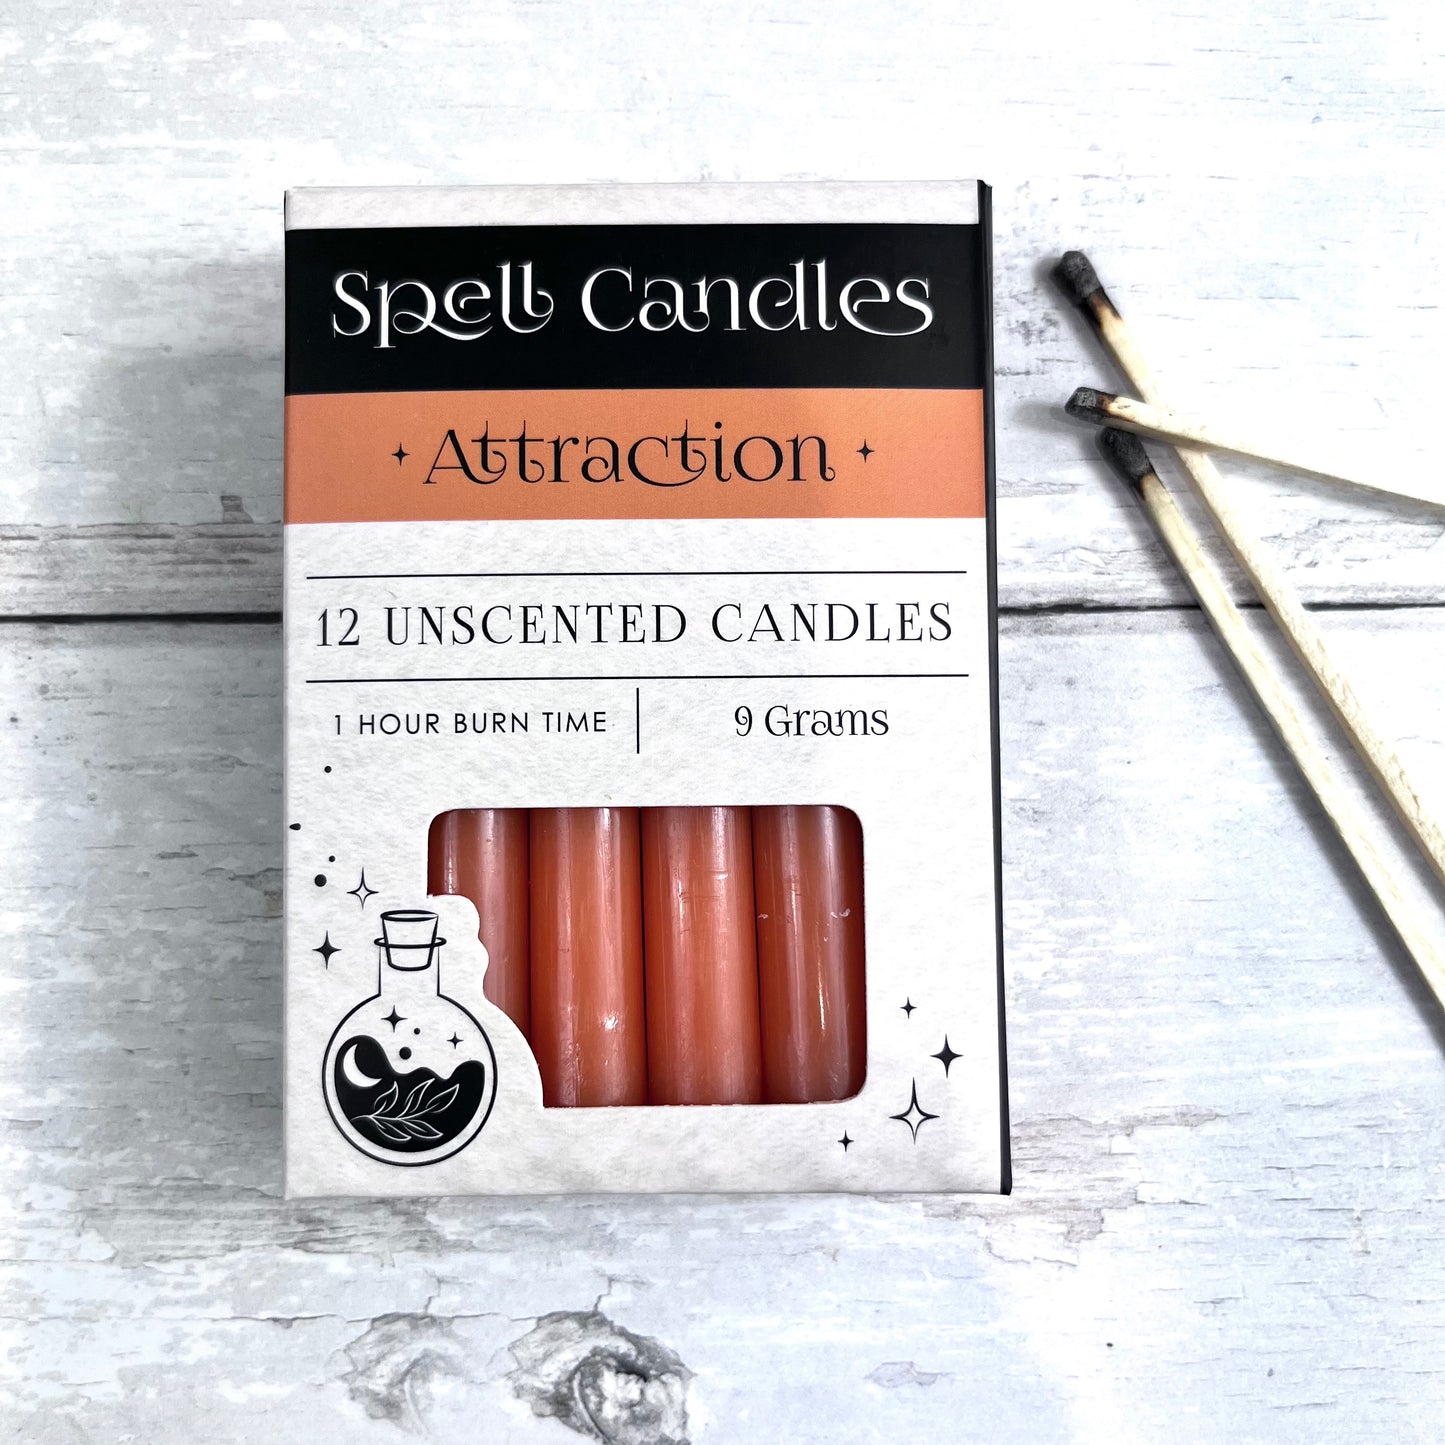 Attraction Spell Candles